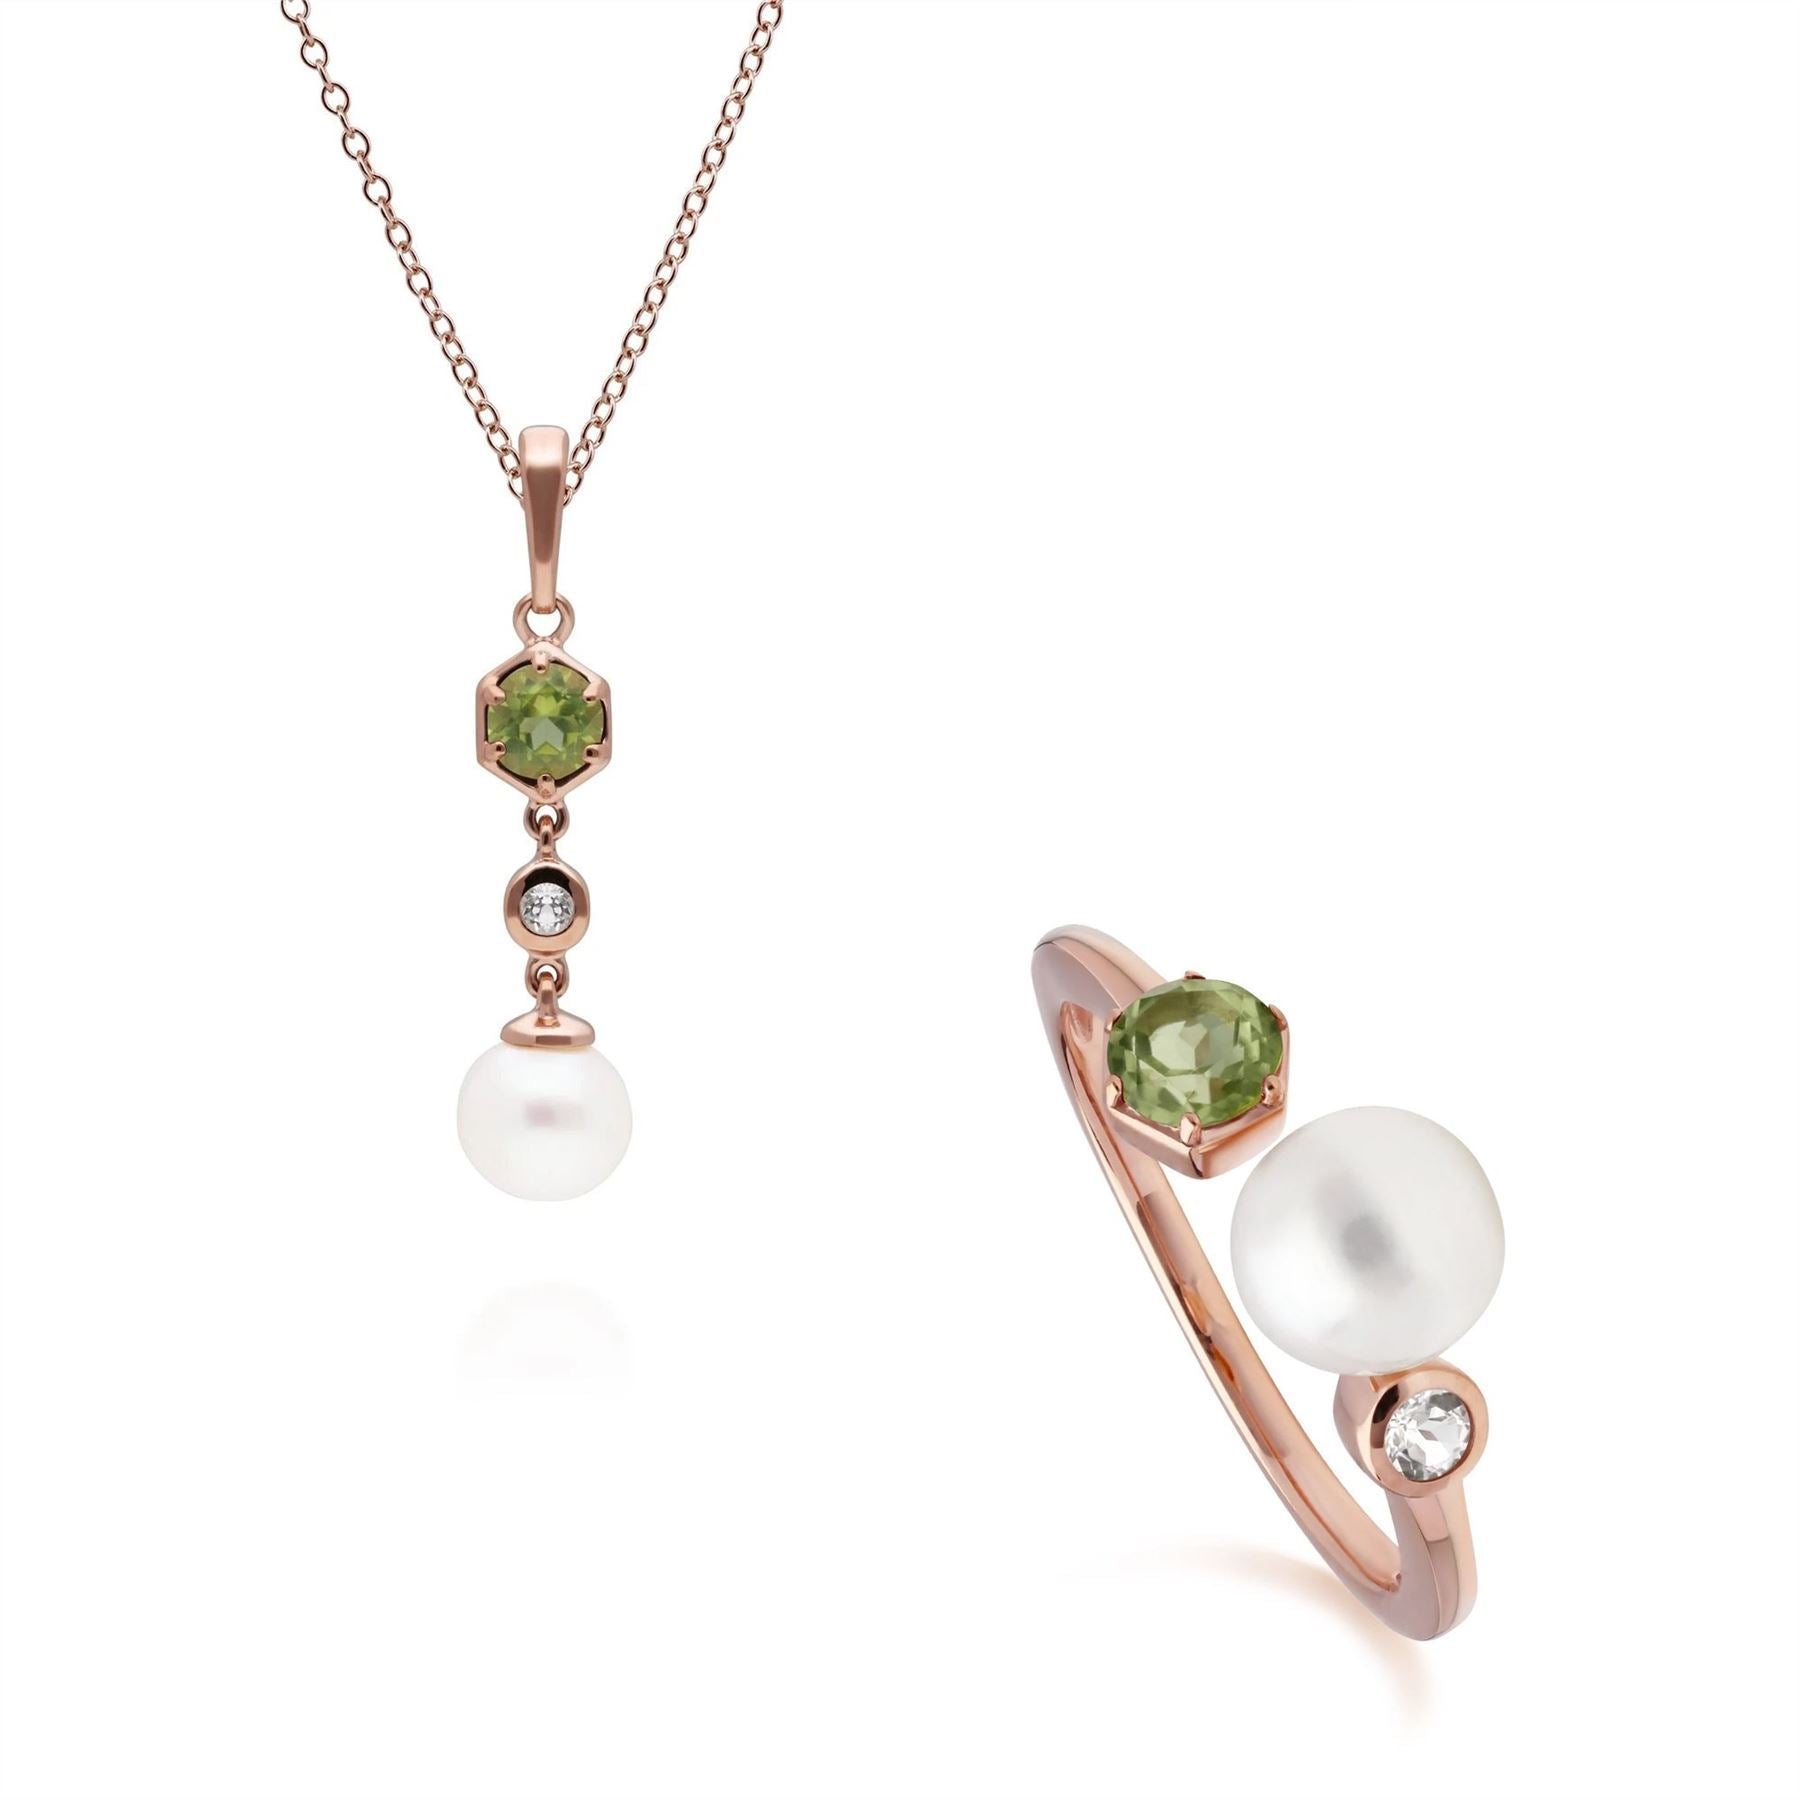 Modern Pearl, Peridot & Topaz Pendant & Ring Set in Rose Gold Plated Sterling Silver